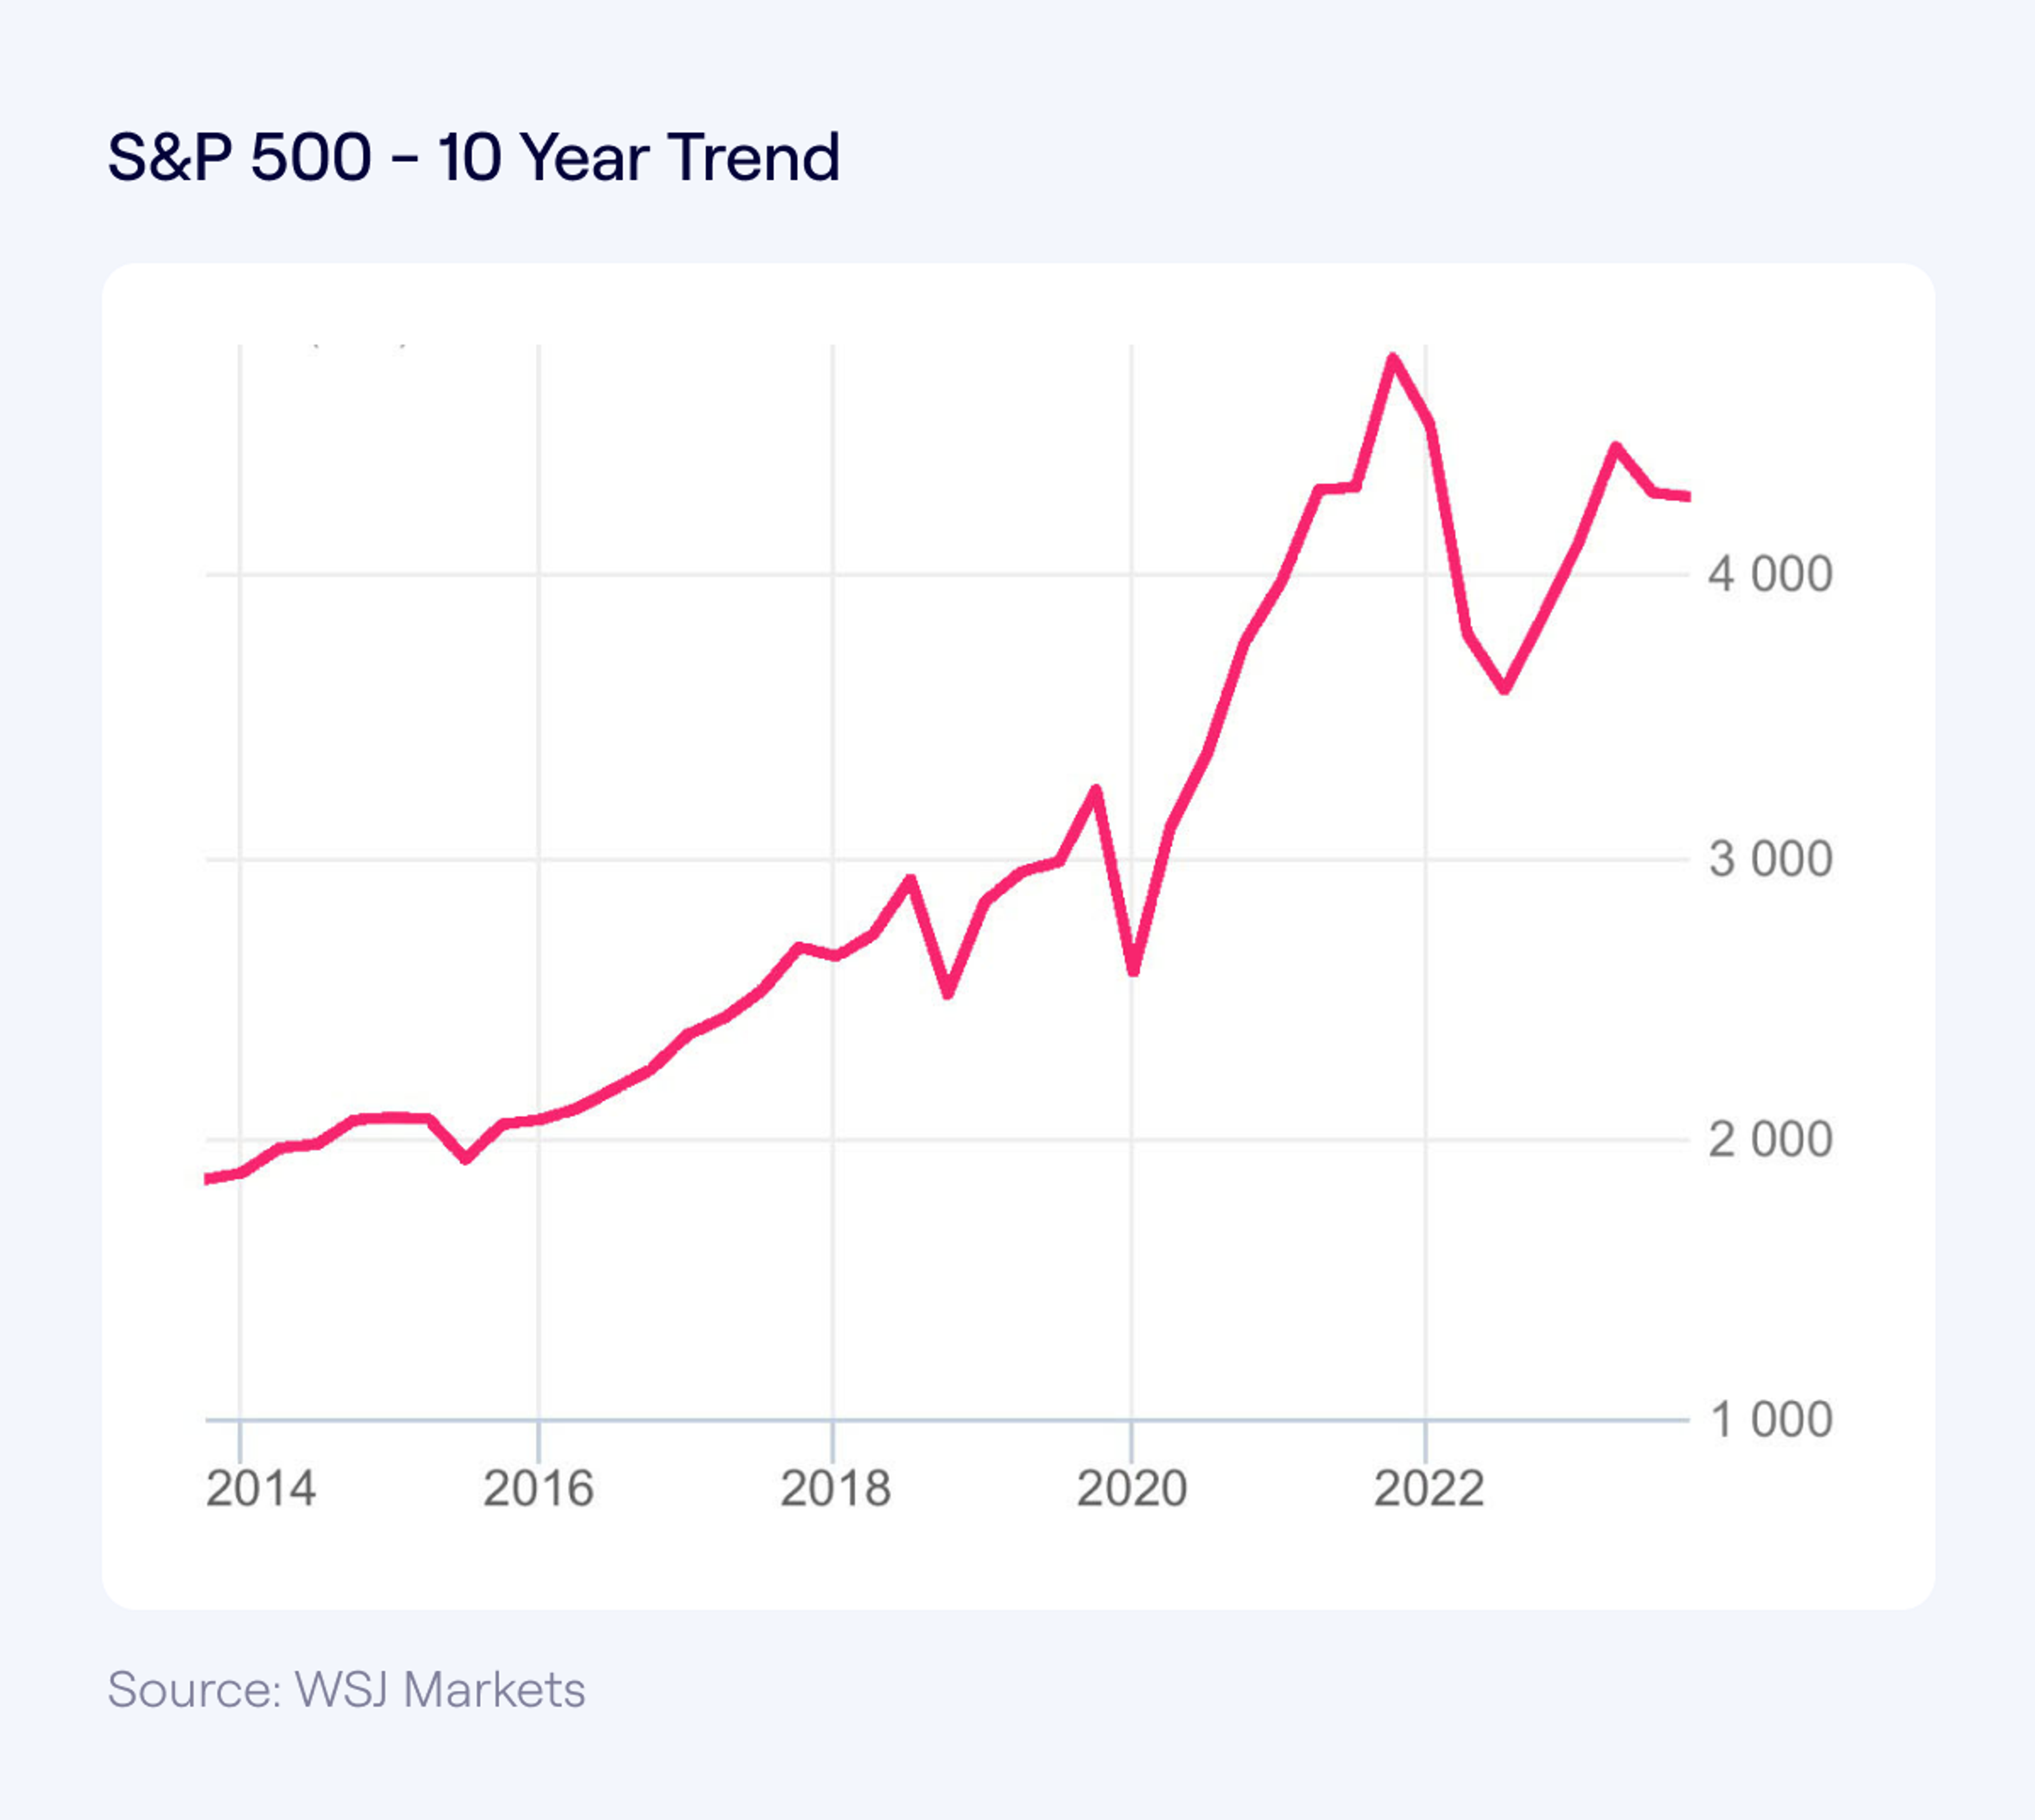 A line chart showing S&P 500 performance over the last 10 years